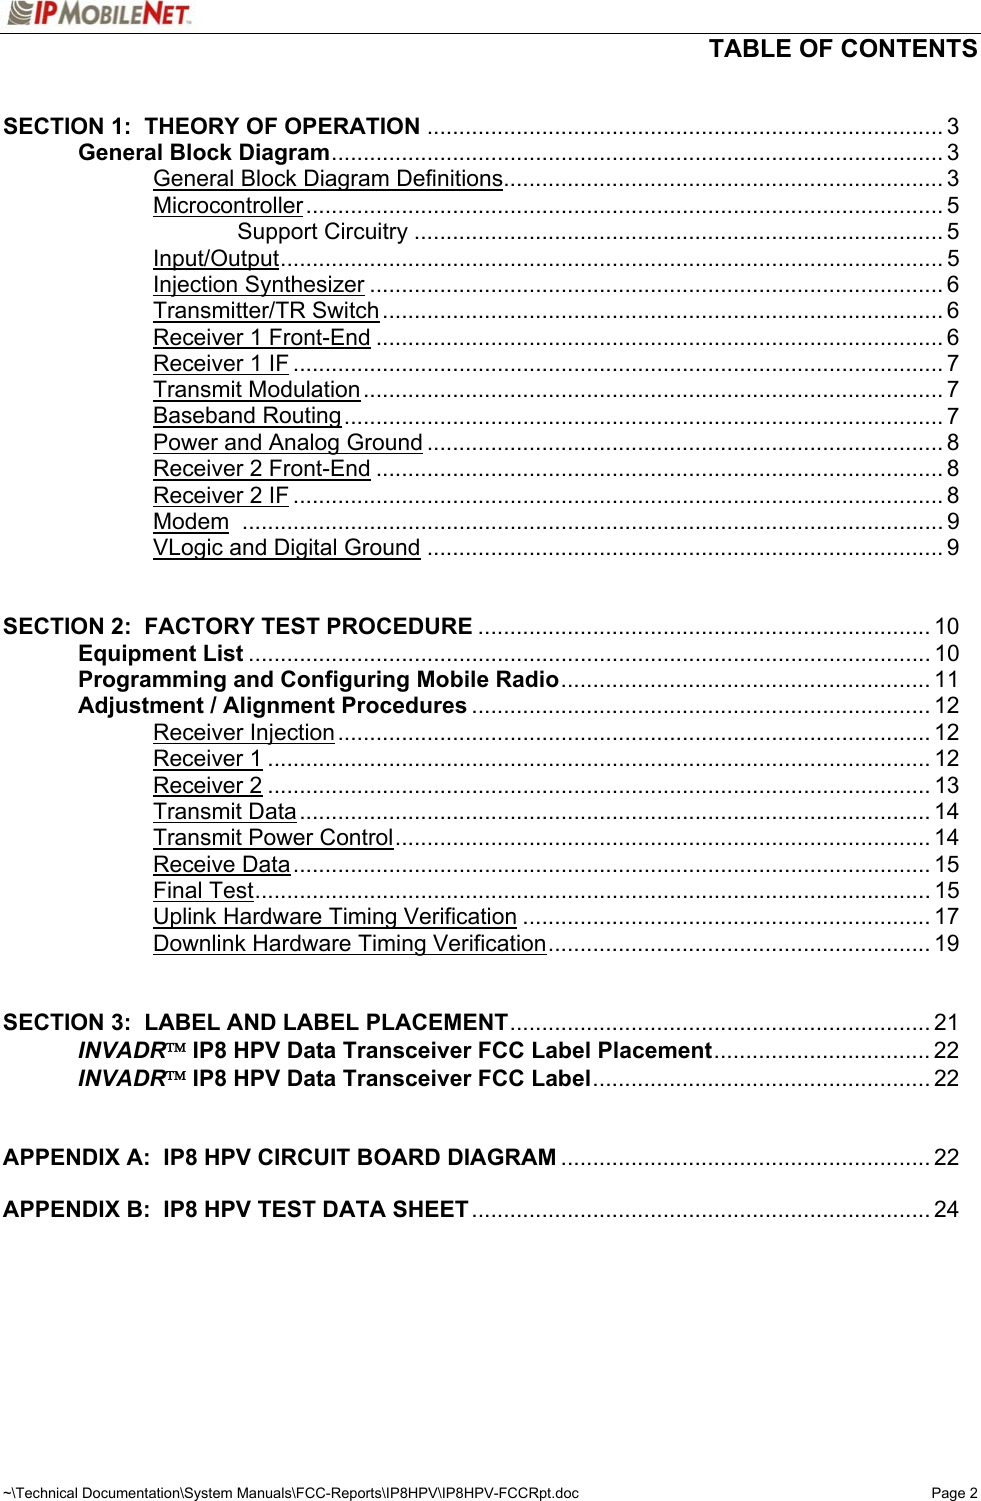   TABLE OF CONTENTS  ~\Technical Documentation\System Manuals\FCC-Reports\IP8HPV\IP8HPV-FCCRpt.doc  Page 2  SECTION 1:  THEORY OF OPERATION ................................................................................. 3   General Block Diagram................................................................................................ 3     General Block Diagram Definitions..................................................................... 3   Microcontroller.................................................................................................... 5     Support Circuitry ................................................................................... 5   Input/Output........................................................................................................ 5   Injection Synthesizer .......................................................................................... 6   Transmitter/TR Switch........................................................................................ 6   Receiver 1 Front-End ......................................................................................... 6   Receiver 1 IF ...................................................................................................... 7   Transmit Modulation........................................................................................... 7   Baseband Routing.............................................................................................. 7     Power and Analog Ground ................................................................................. 8   Receiver 2 Front-End ......................................................................................... 8   Receiver 2 IF ...................................................................................................... 8   Modem .............................................................................................................. 9   VLogic and Digital Ground ................................................................................. 9   SECTION 2:  FACTORY TEST PROCEDURE ....................................................................... 10  Equipment List ........................................................................................................... 10   Programming and Configuring Mobile Radio.......................................................... 11   Adjustment / Alignment Procedures ........................................................................ 12   Receiver Injection............................................................................................. 12   Receiver 1........................................................................................................ 12   Receiver 2........................................................................................................ 13   Transmit Data................................................................................................... 14   Transmit Power Control.................................................................................... 14   Receive Data.................................................................................................... 15   Final Test.......................................................................................................... 15     Uplink Hardware Timing Verification ................................................................ 17     Downlink Hardware Timing Verification............................................................ 19   SECTION 3:  LABEL AND LABEL PLACEMENT.................................................................. 21  INVADR IP8 HPV Data Transceiver FCC Label Placement.................................. 22  INVADR IP8 HPV Data Transceiver FCC Label..................................................... 22   APPENDIX A:  IP8 HPV CIRCUIT BOARD DIAGRAM .......................................................... 22  APPENDIX B:  IP8 HPV TEST DATA SHEET........................................................................ 24   